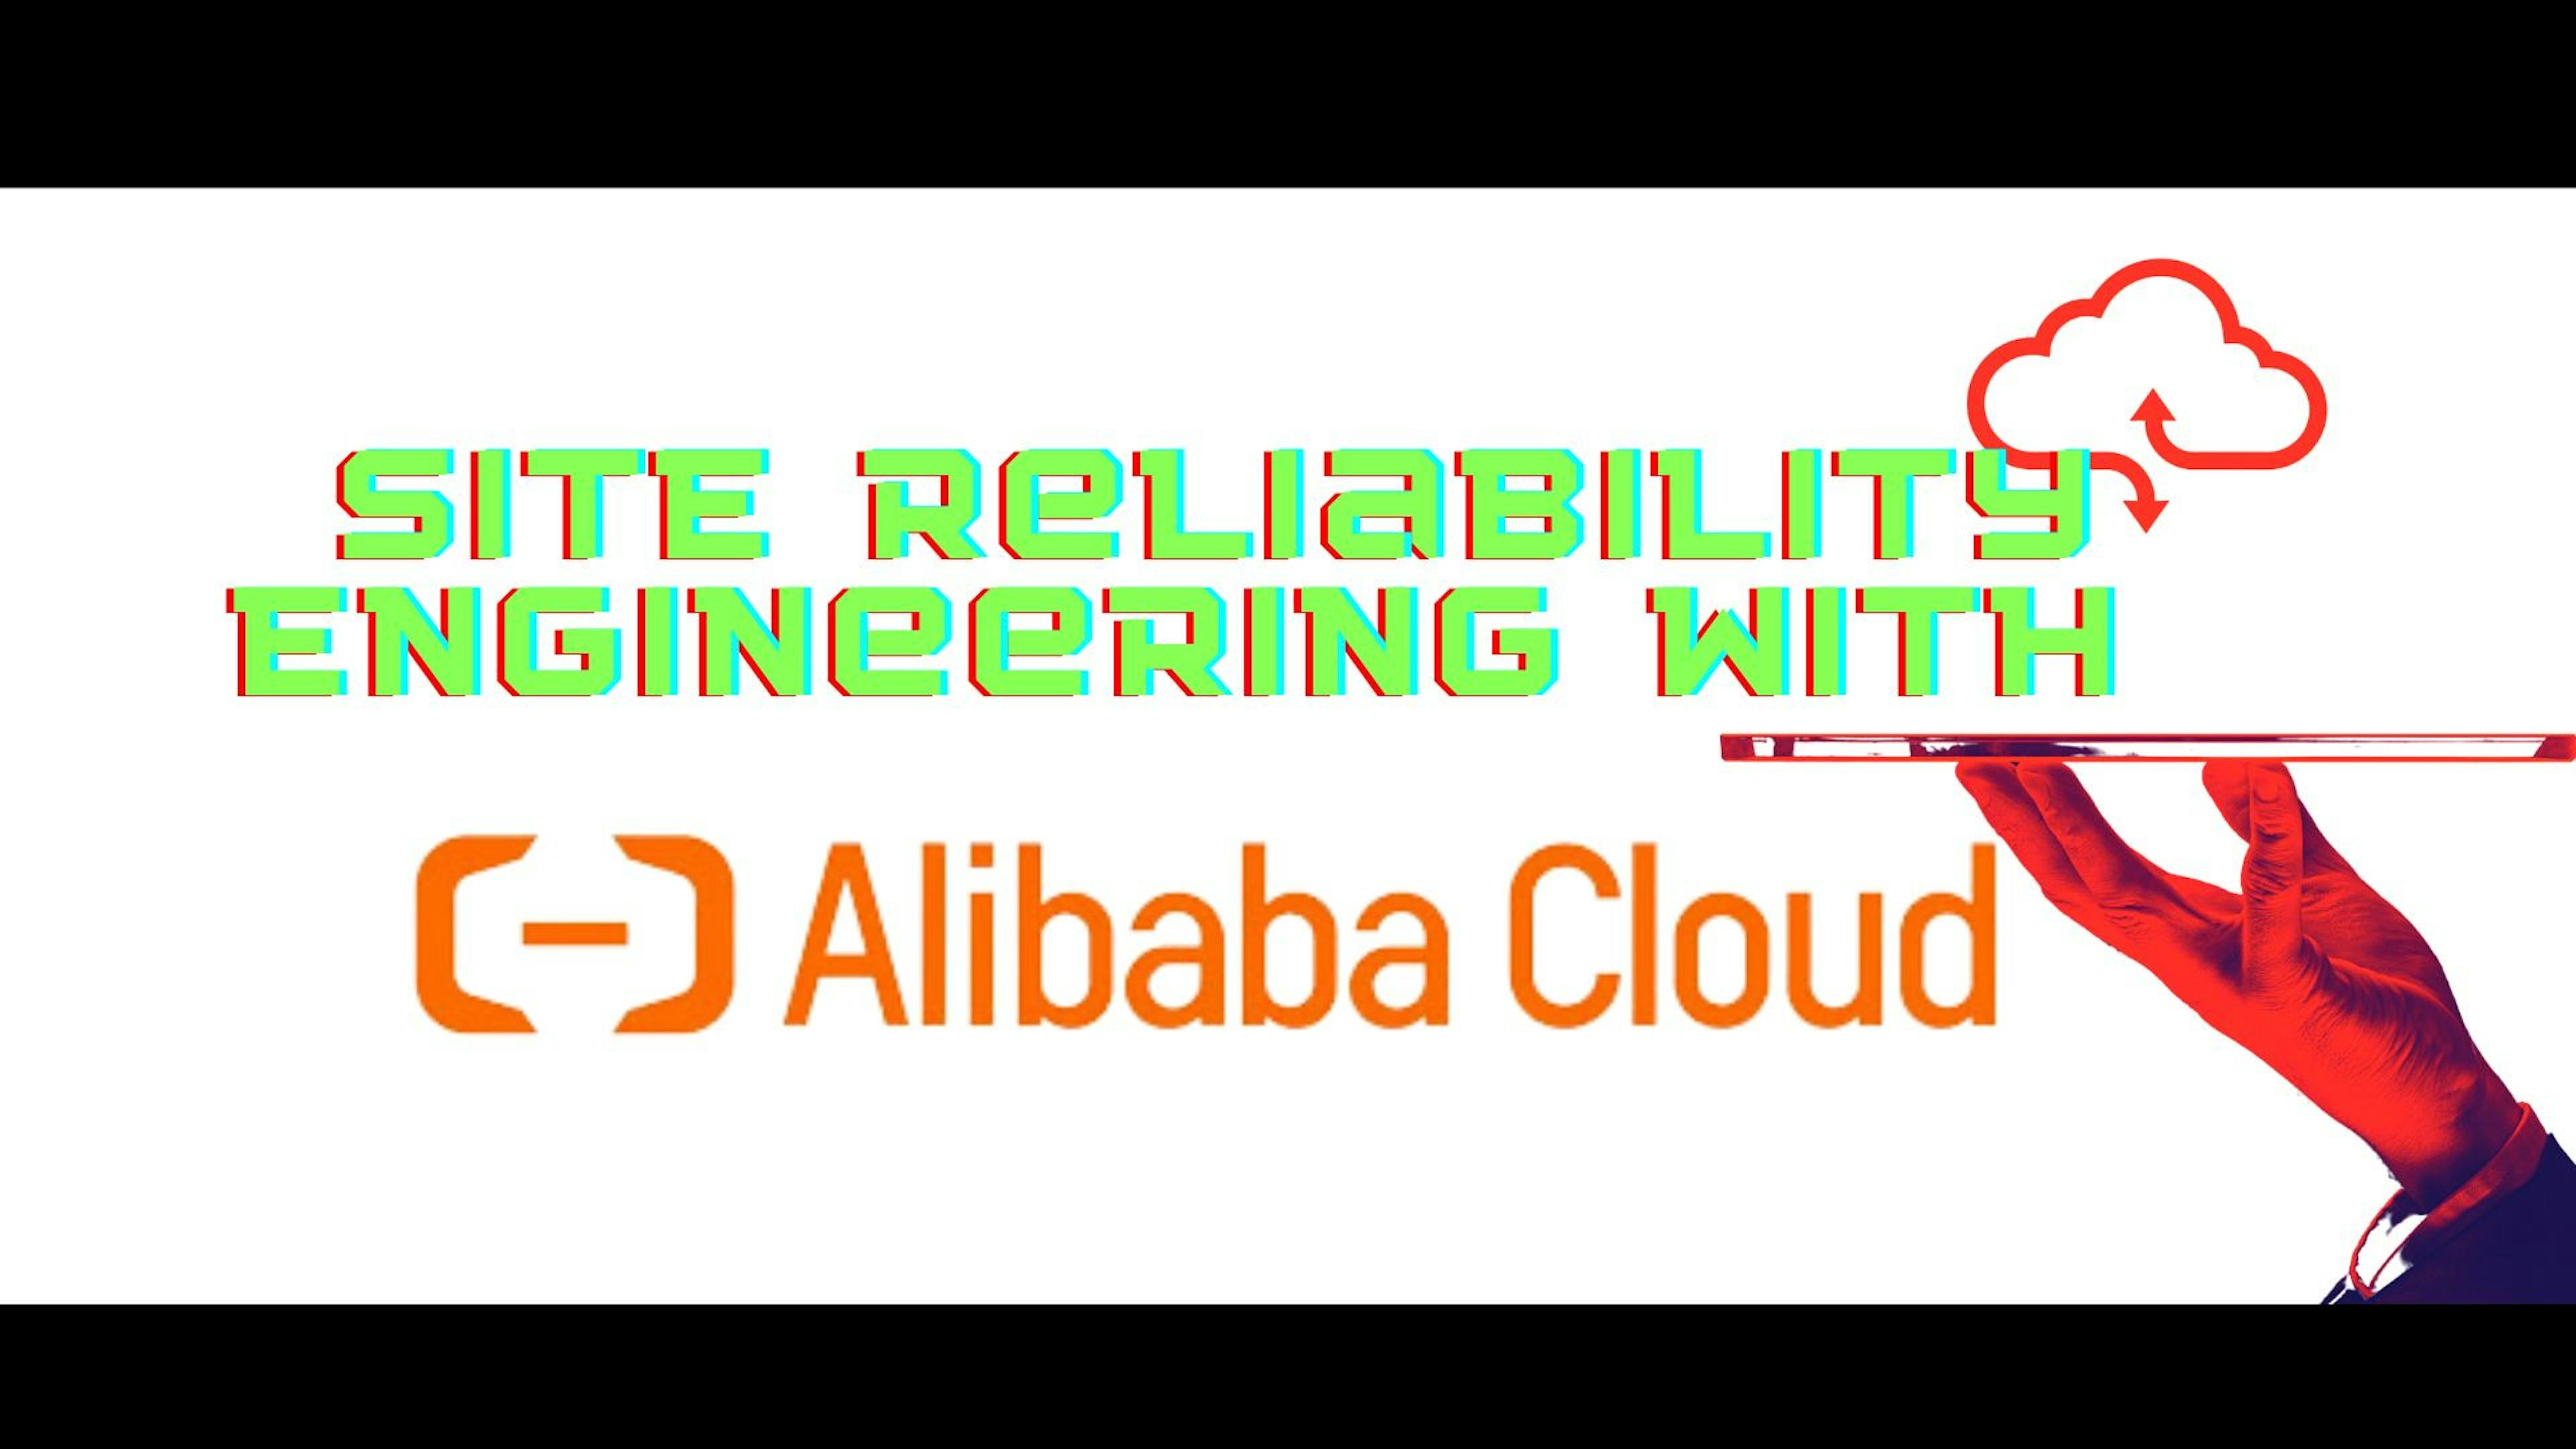 featured image - Site Reliability Engineering with Alibaba Cloud's Monitoring Services